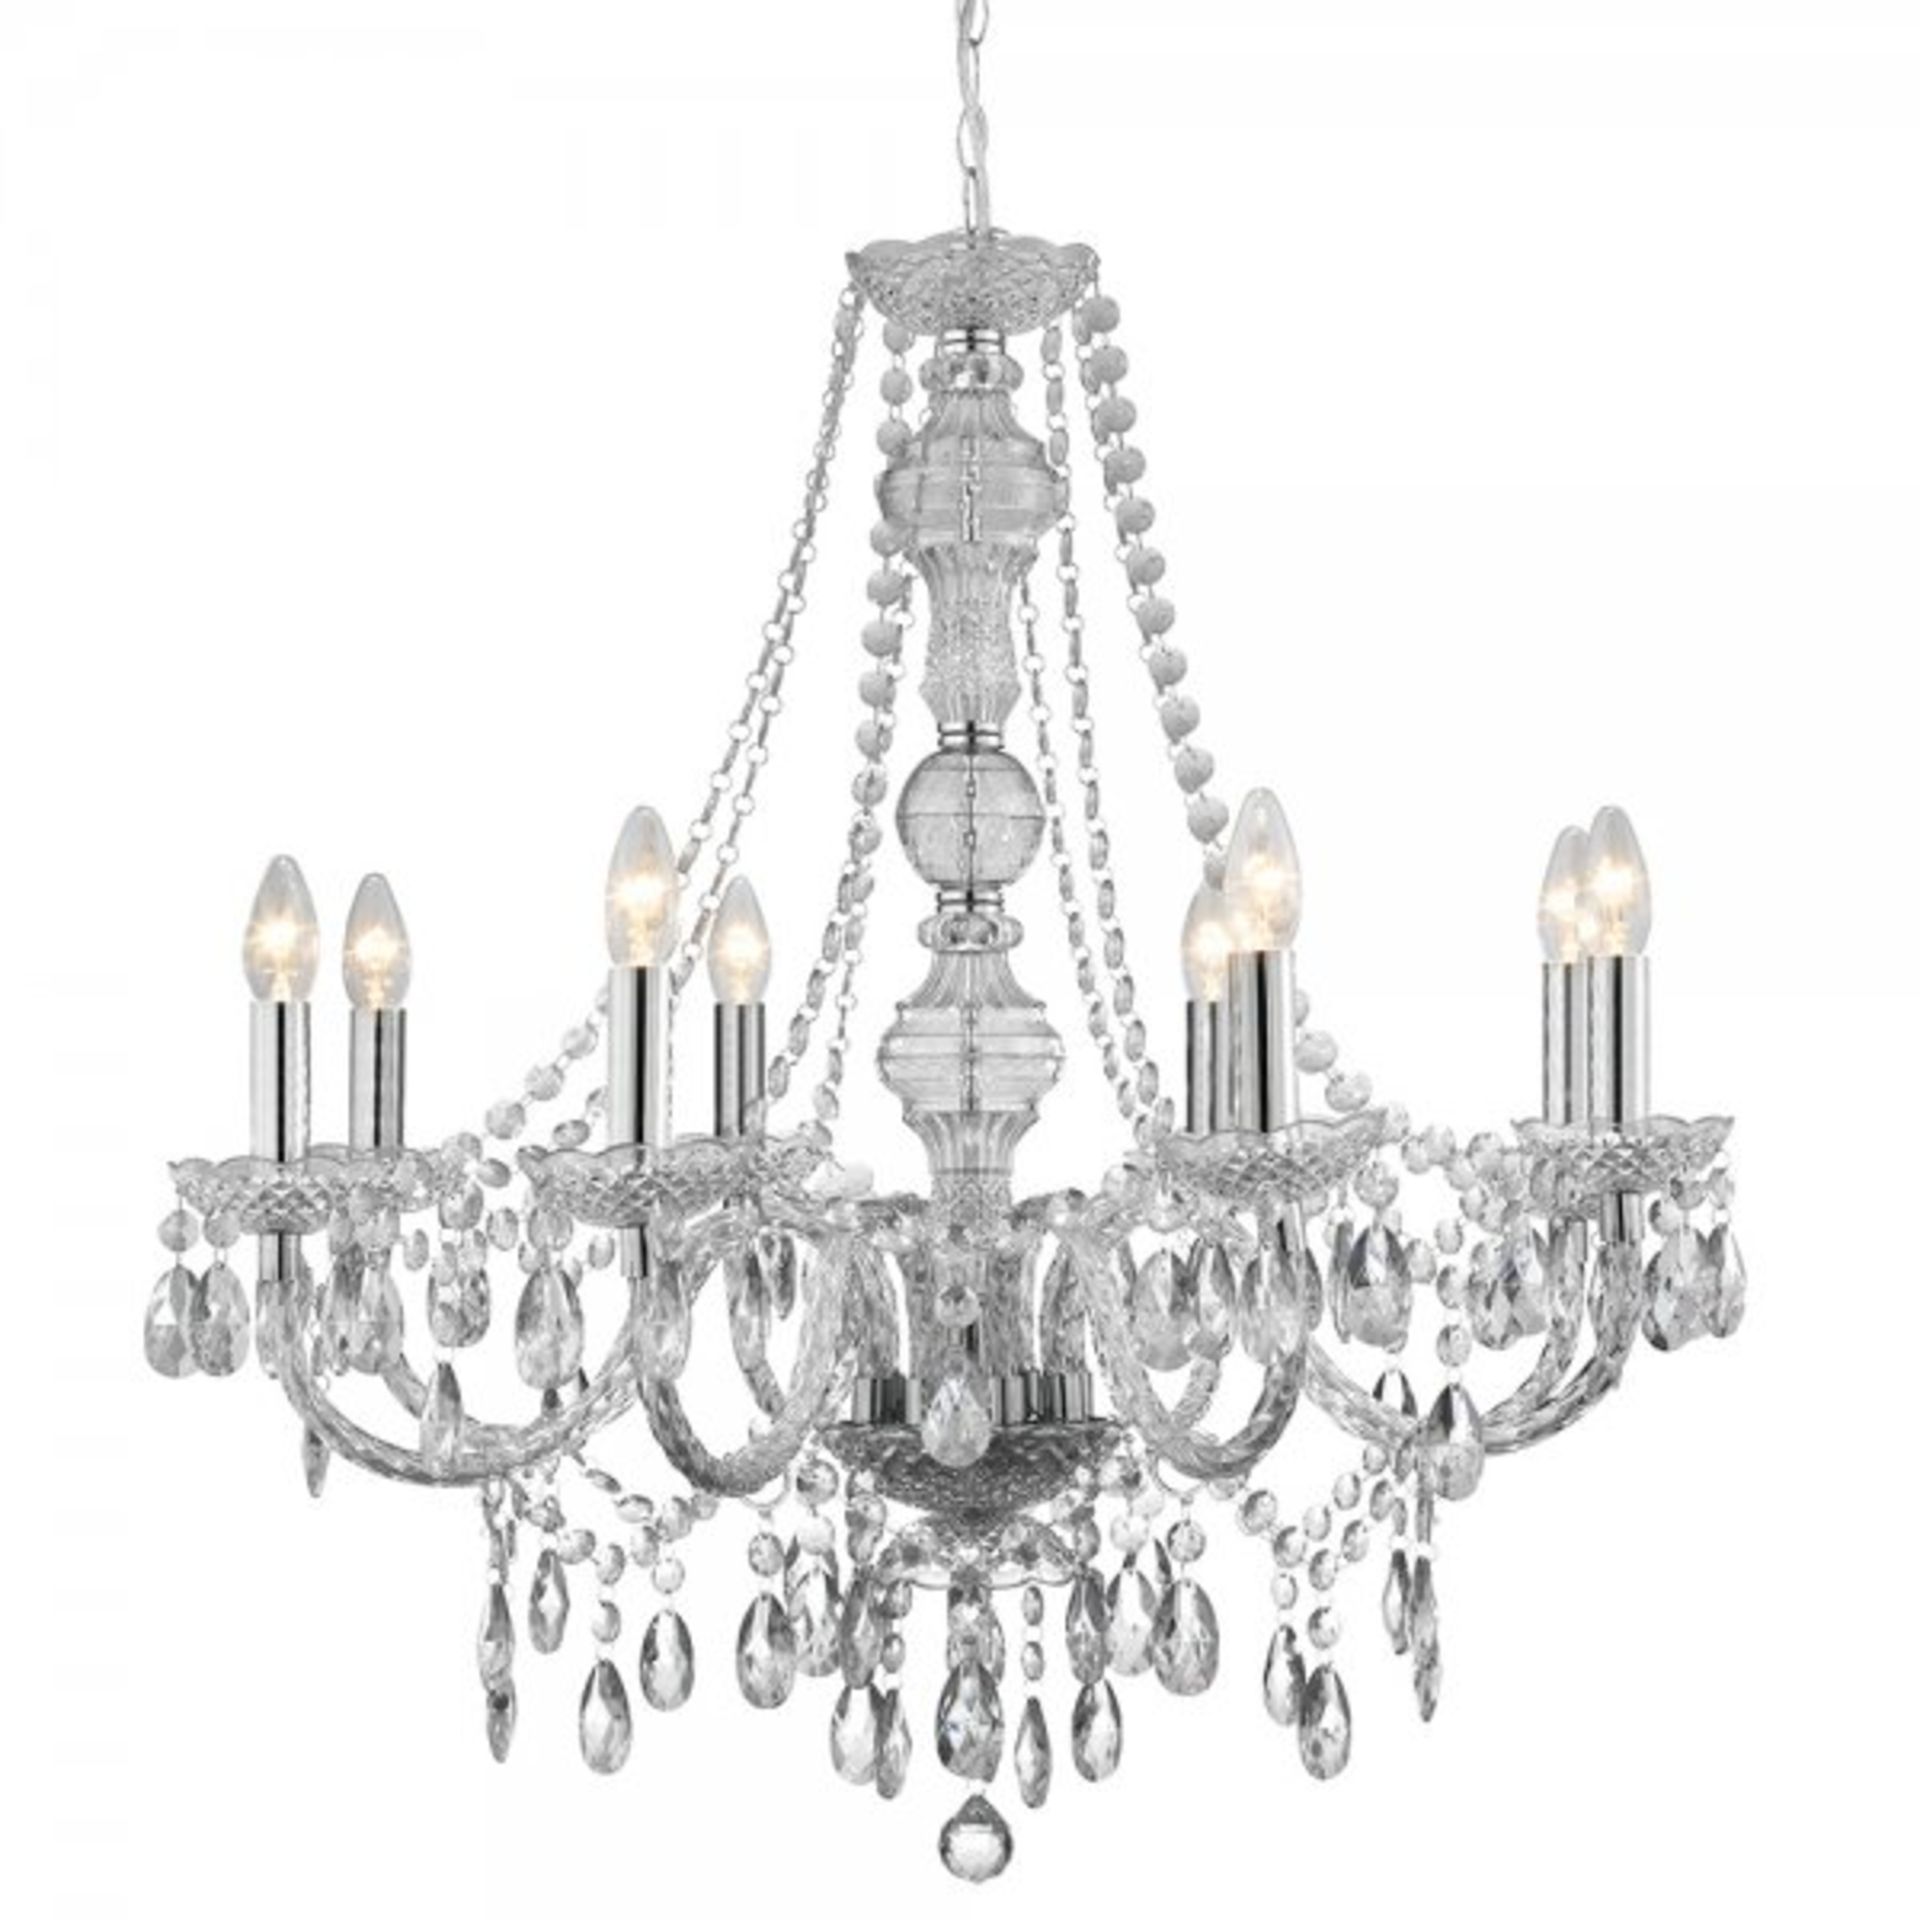 1 x Searchlight Marie Therese Chandelier - Chrome Finish With Clear Trimmings - Product Code 8888- - Image 2 of 2